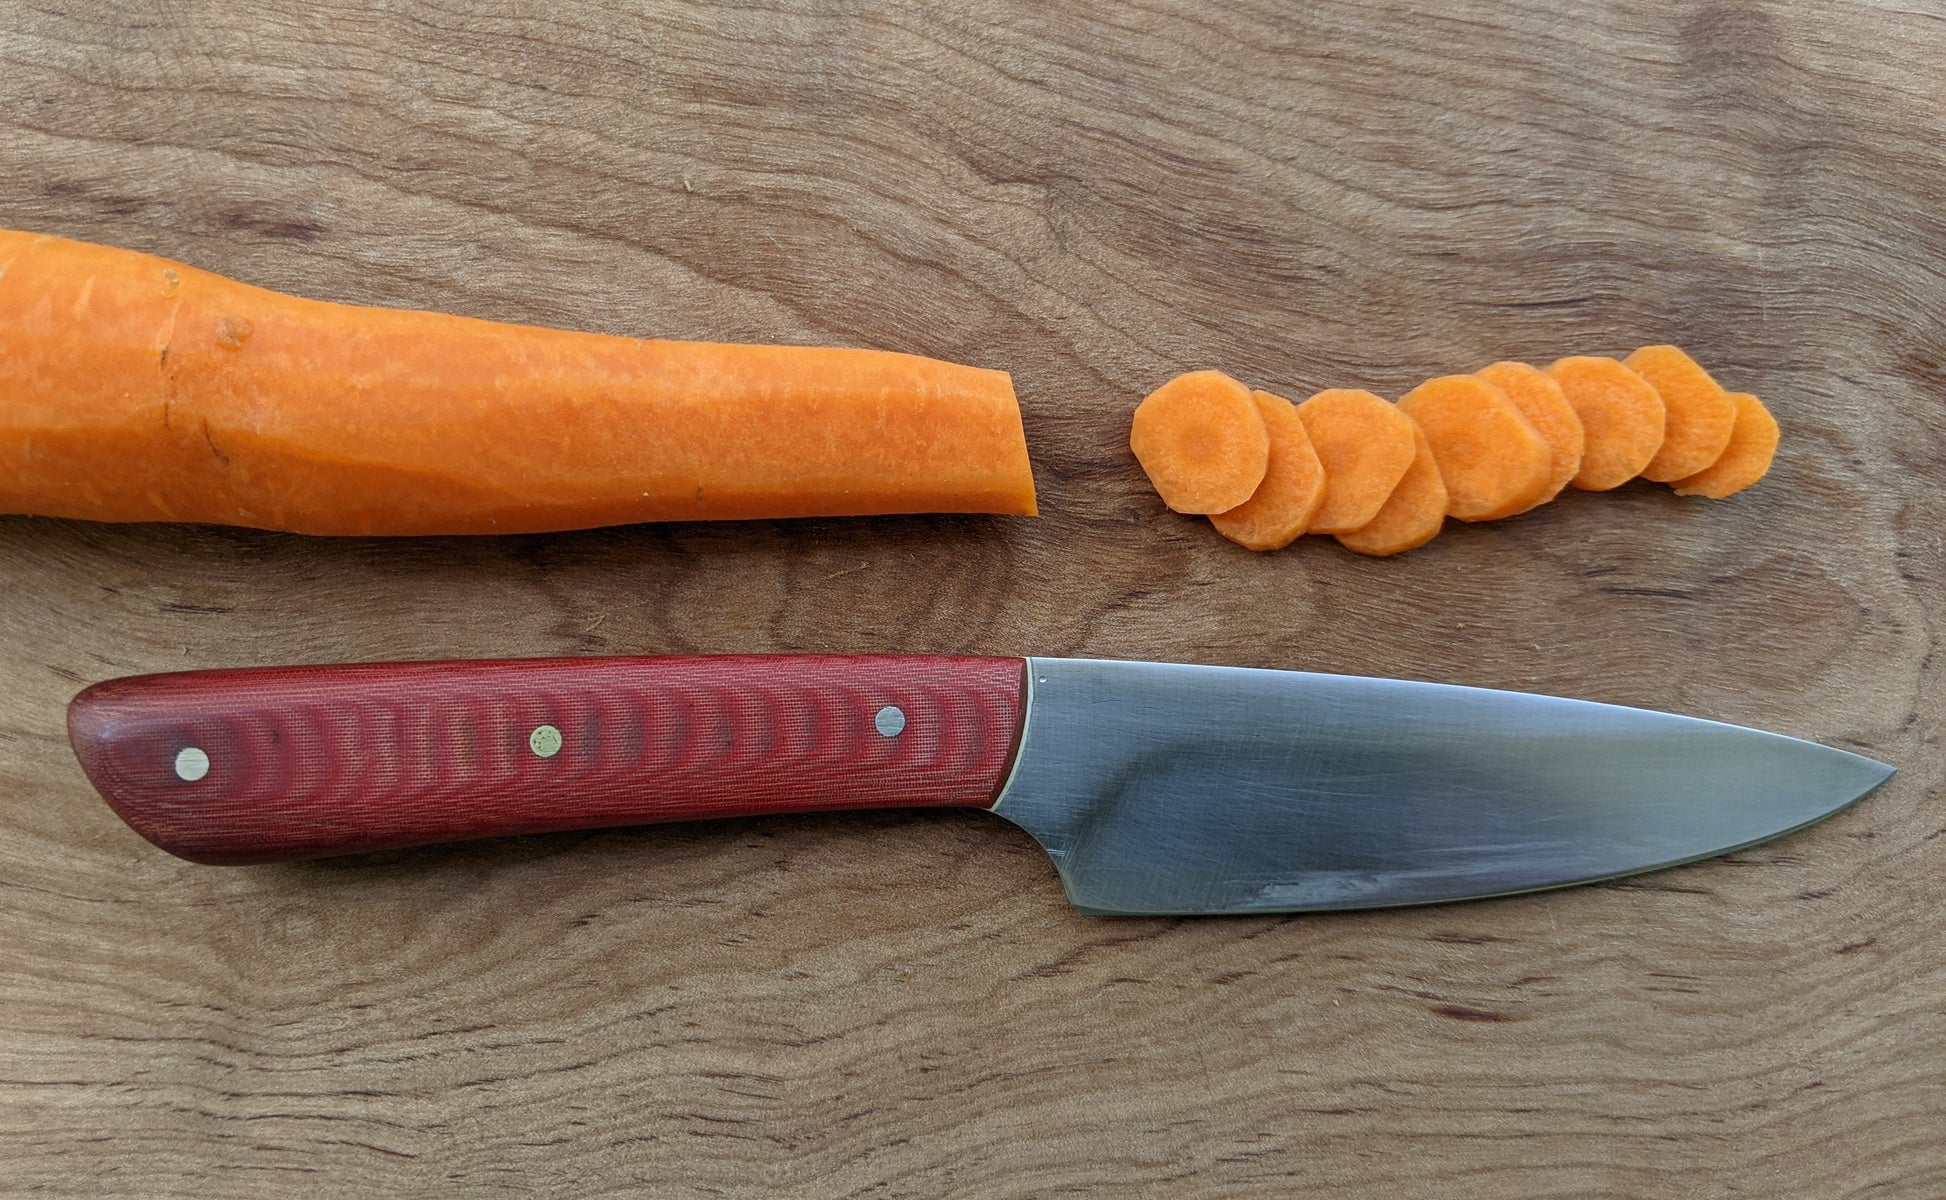 paring knife on cutting board with carrot slices 